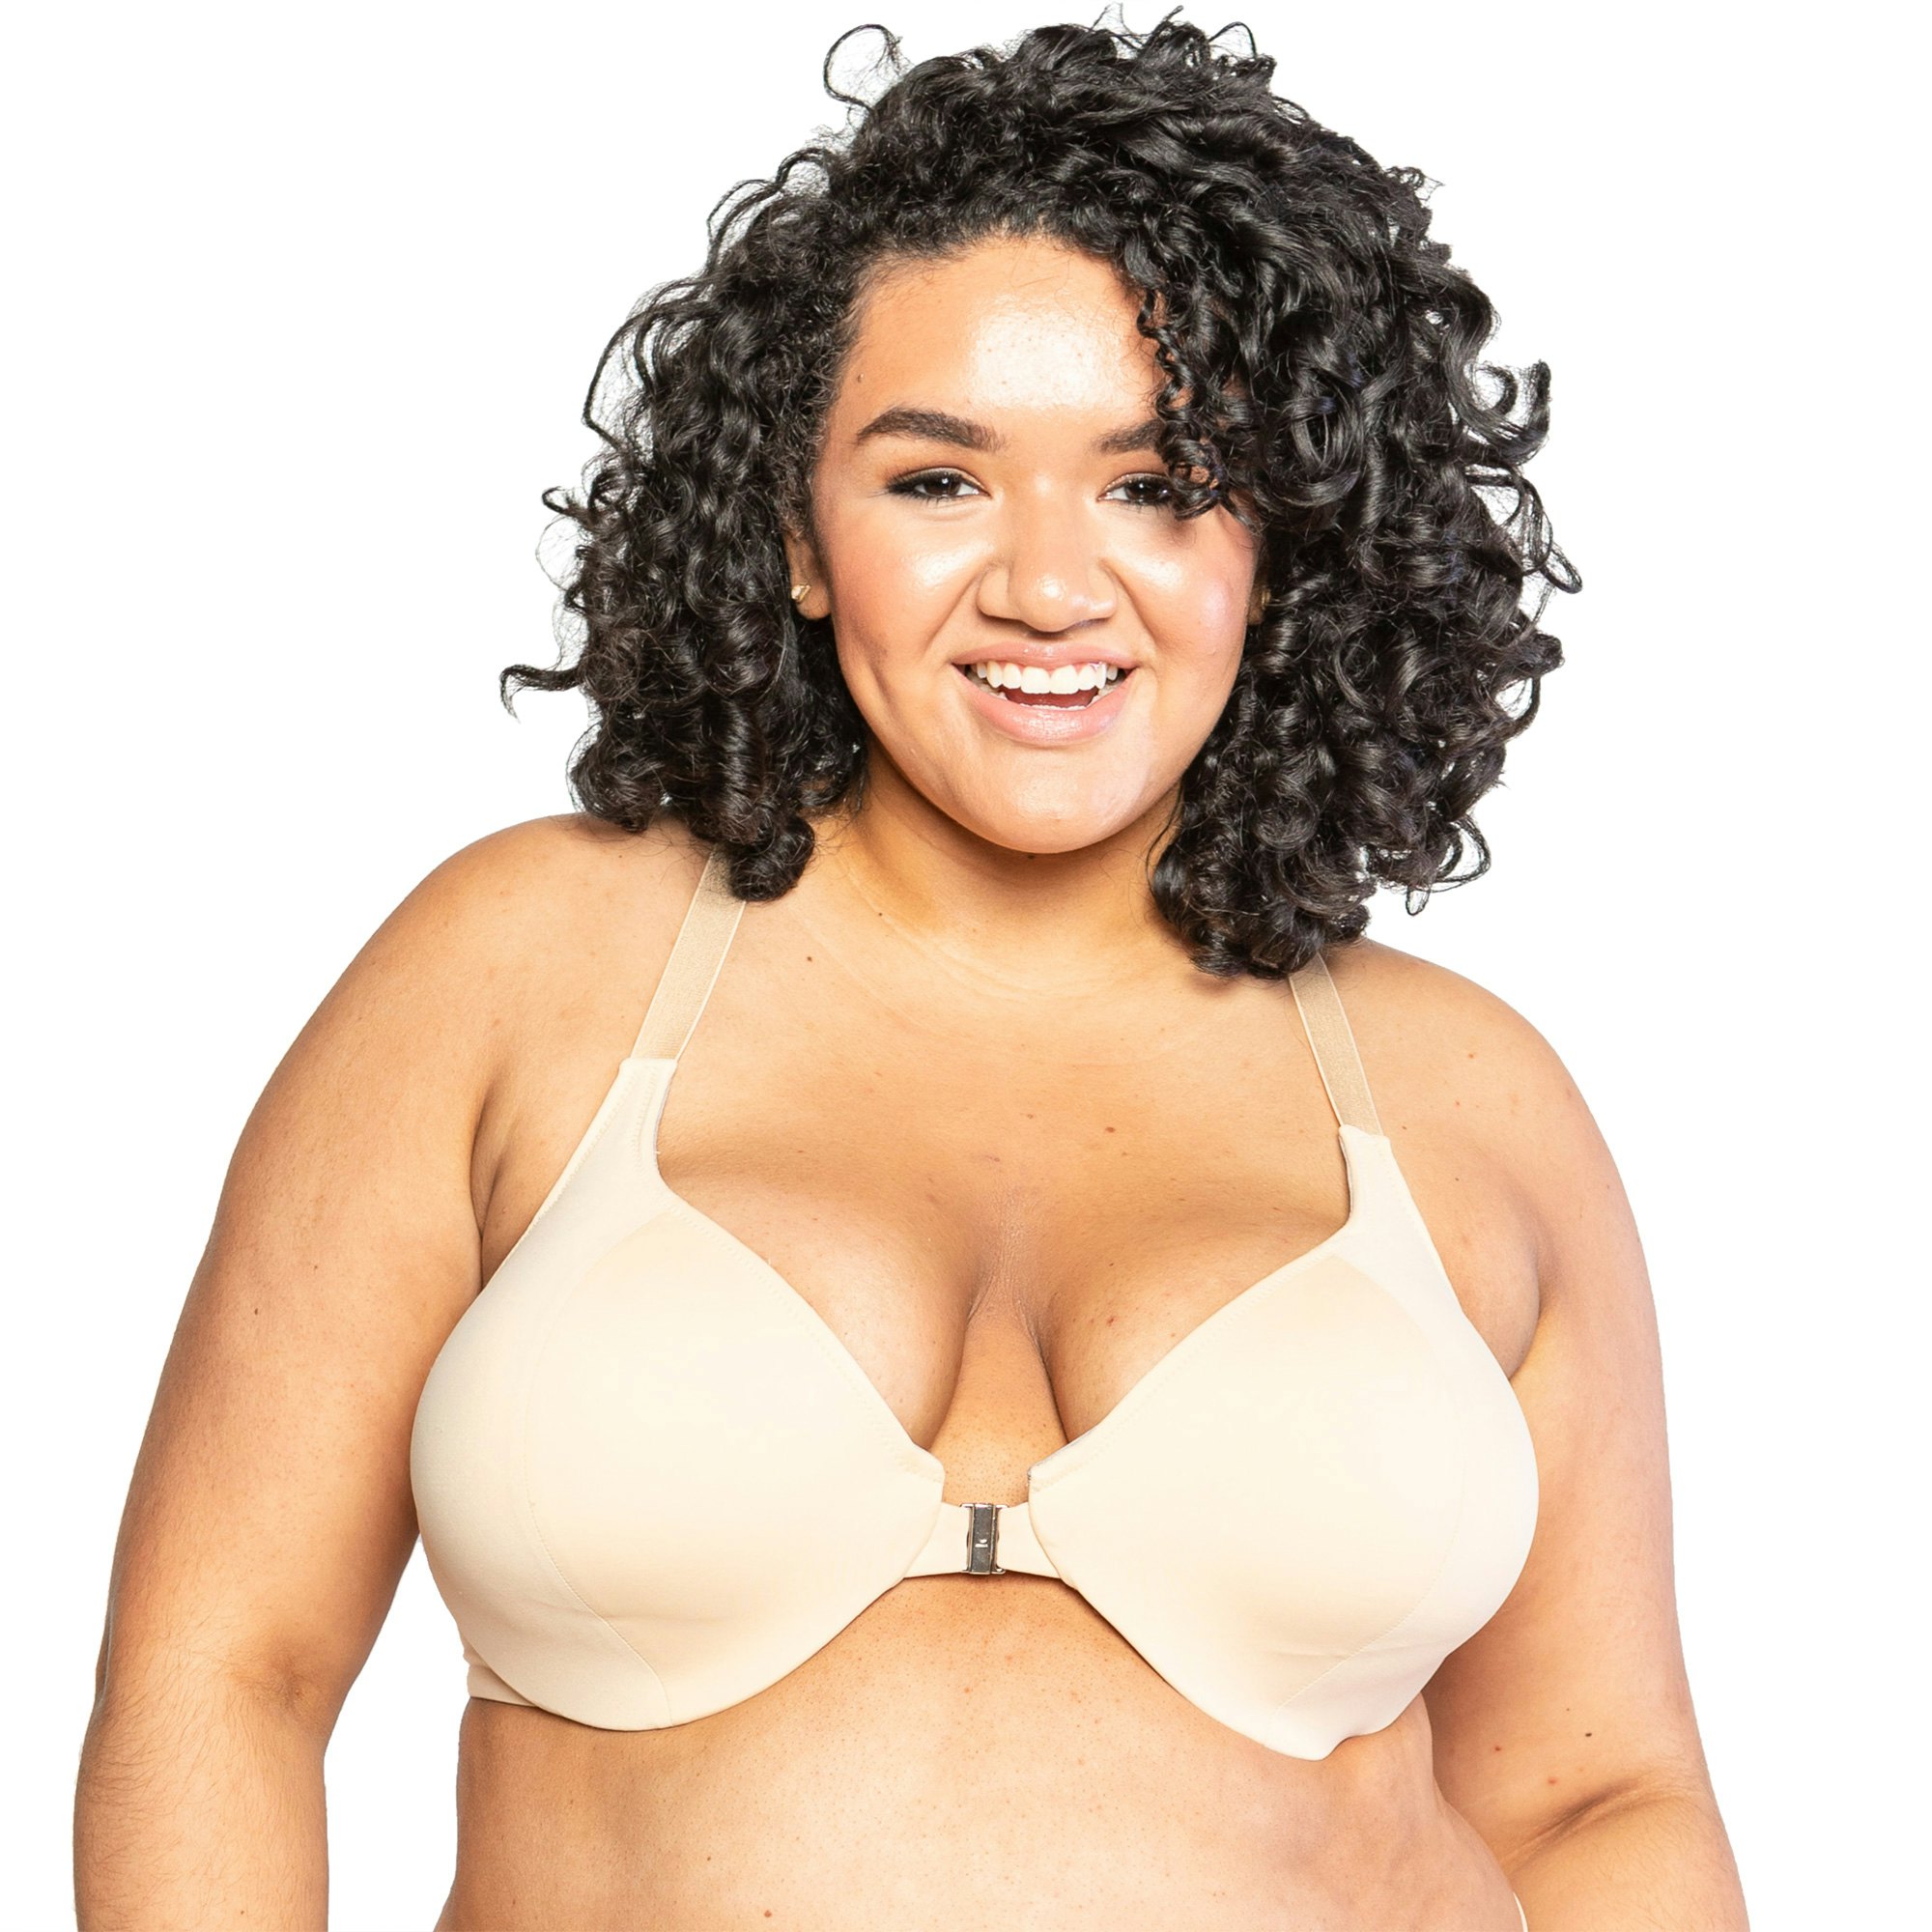 Trusst Brand's Evie Front Closure Bra For Bigger Boobs Was Made